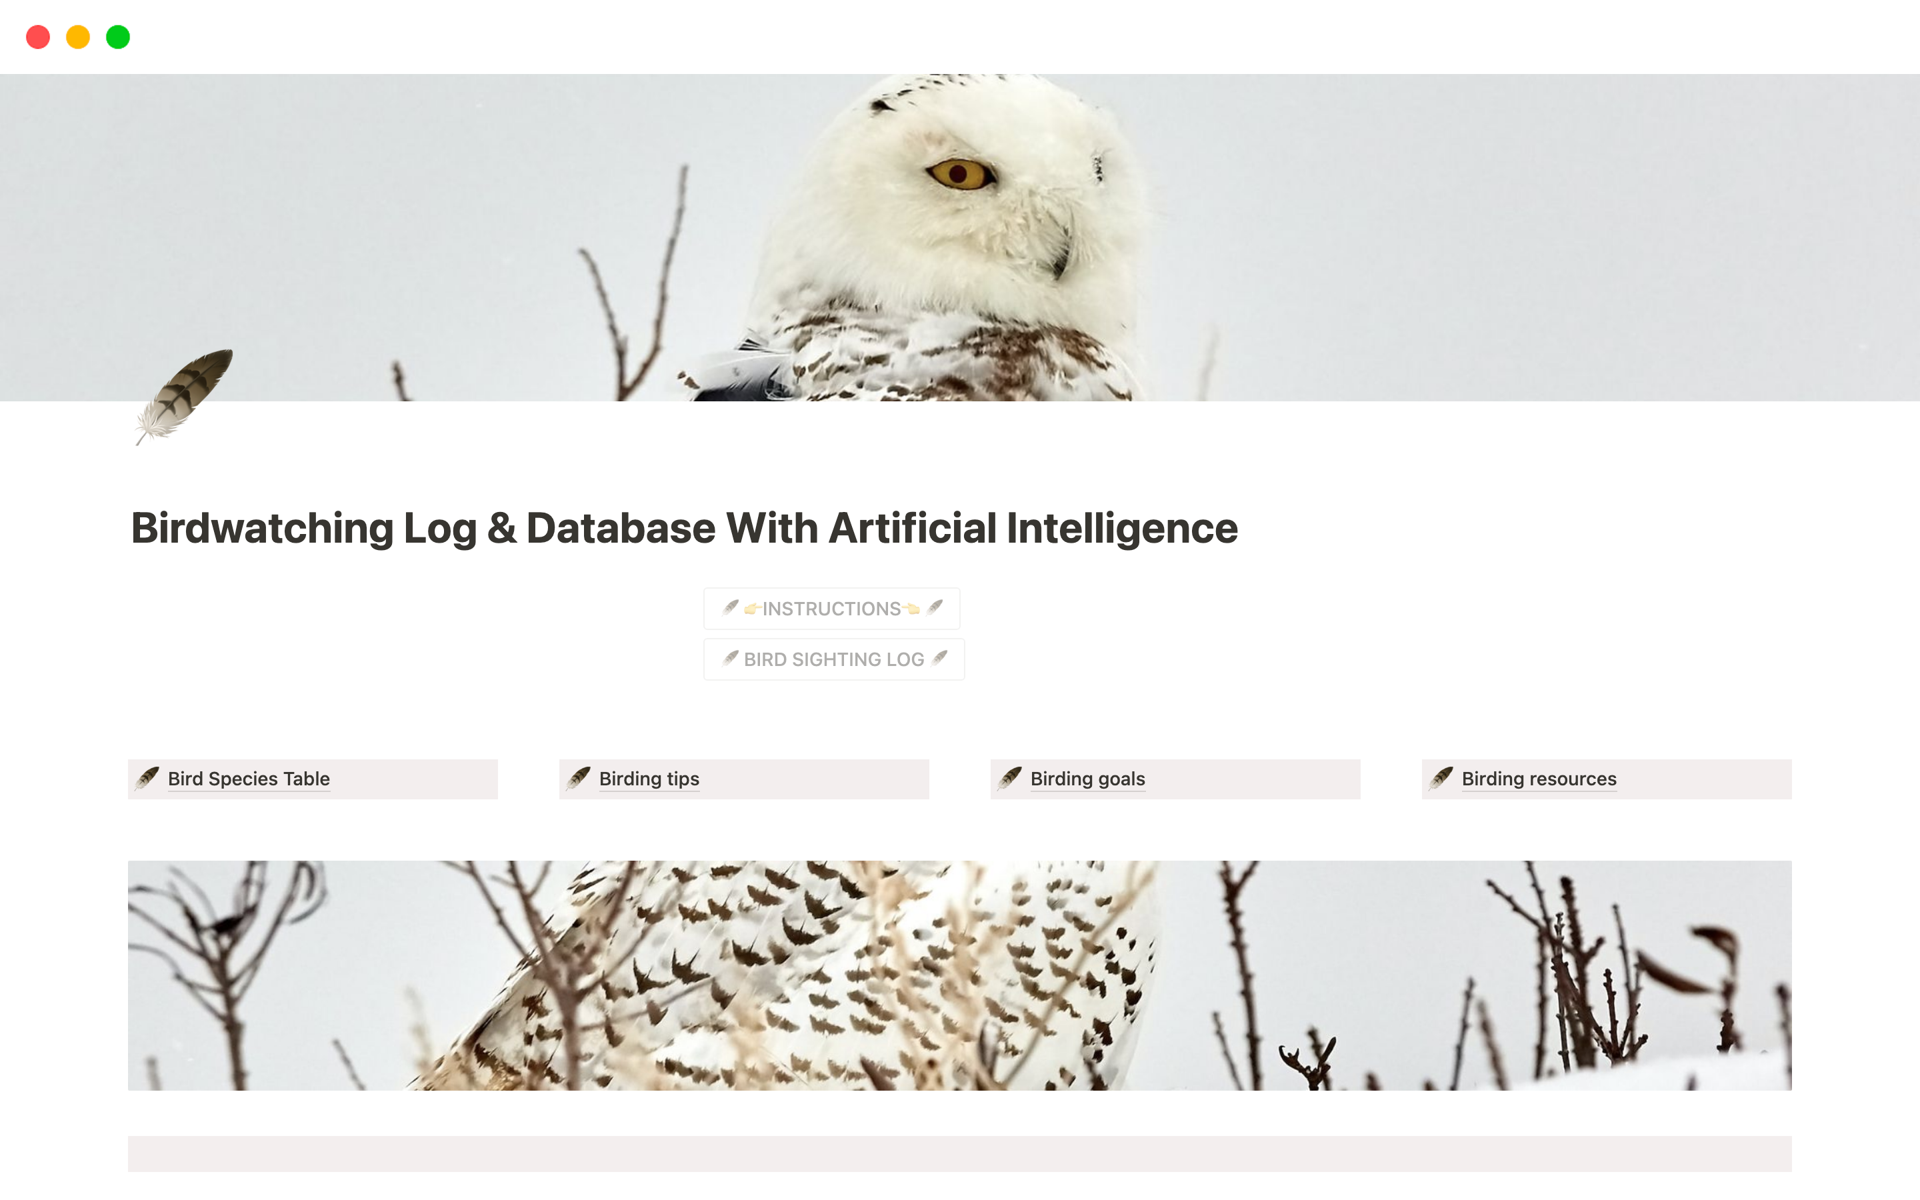 This fully functional and exceptionally detailed birdwatching journaling database uses artificial intelligence to analyze your data and give you amazing insights into your sightings.